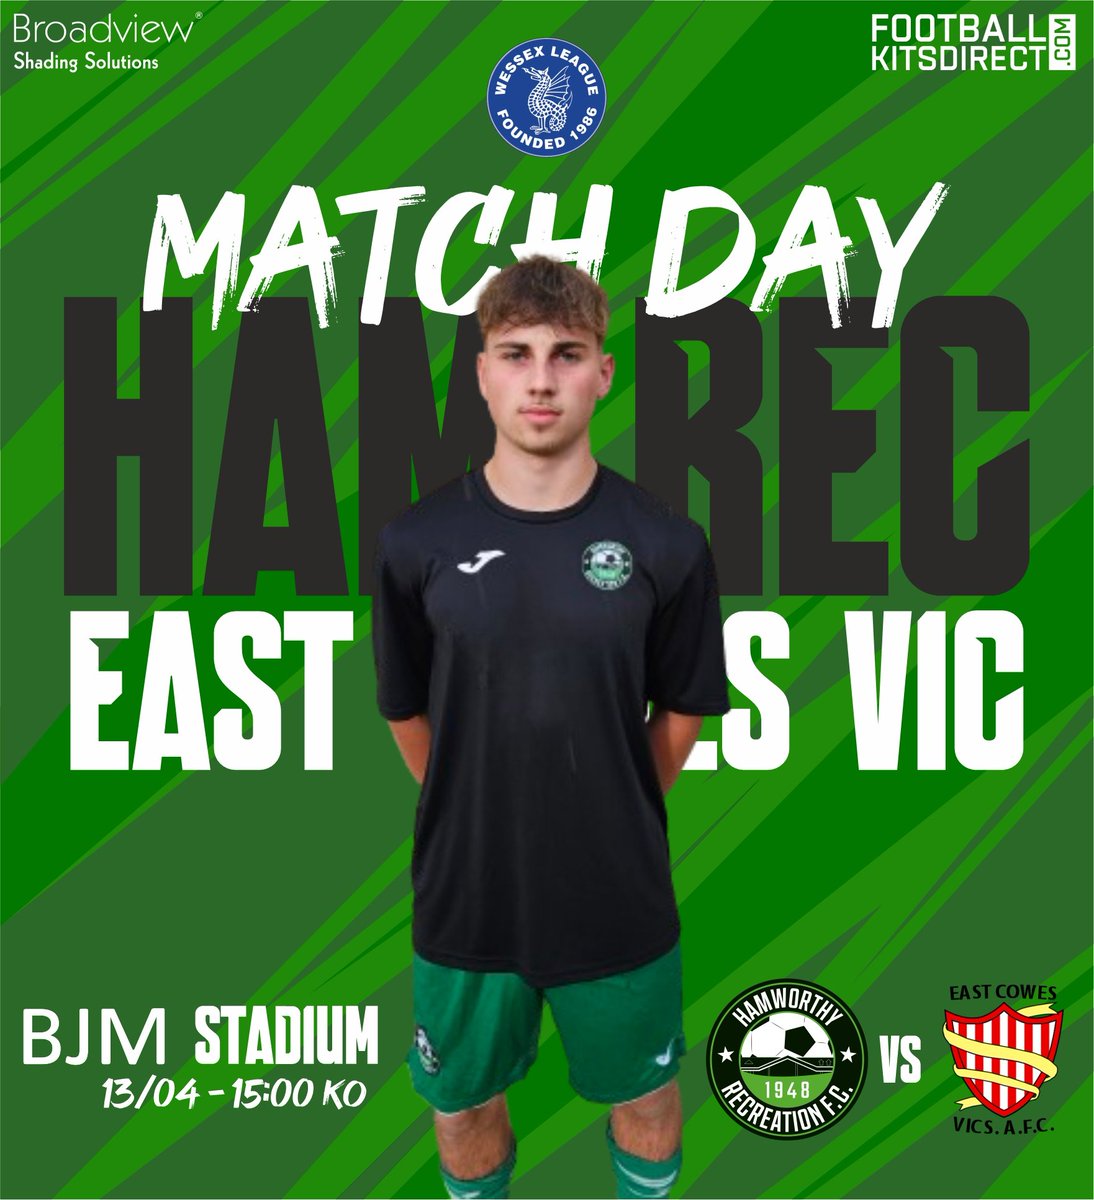 𝗠𝗔𝗧𝗖𝗛𝗗𝗔𝗬 | 🟩 We are back at The BJM Stadium this afternoon as we take on @ecvafc in a @WessexLeague fixture. #UpTheRec